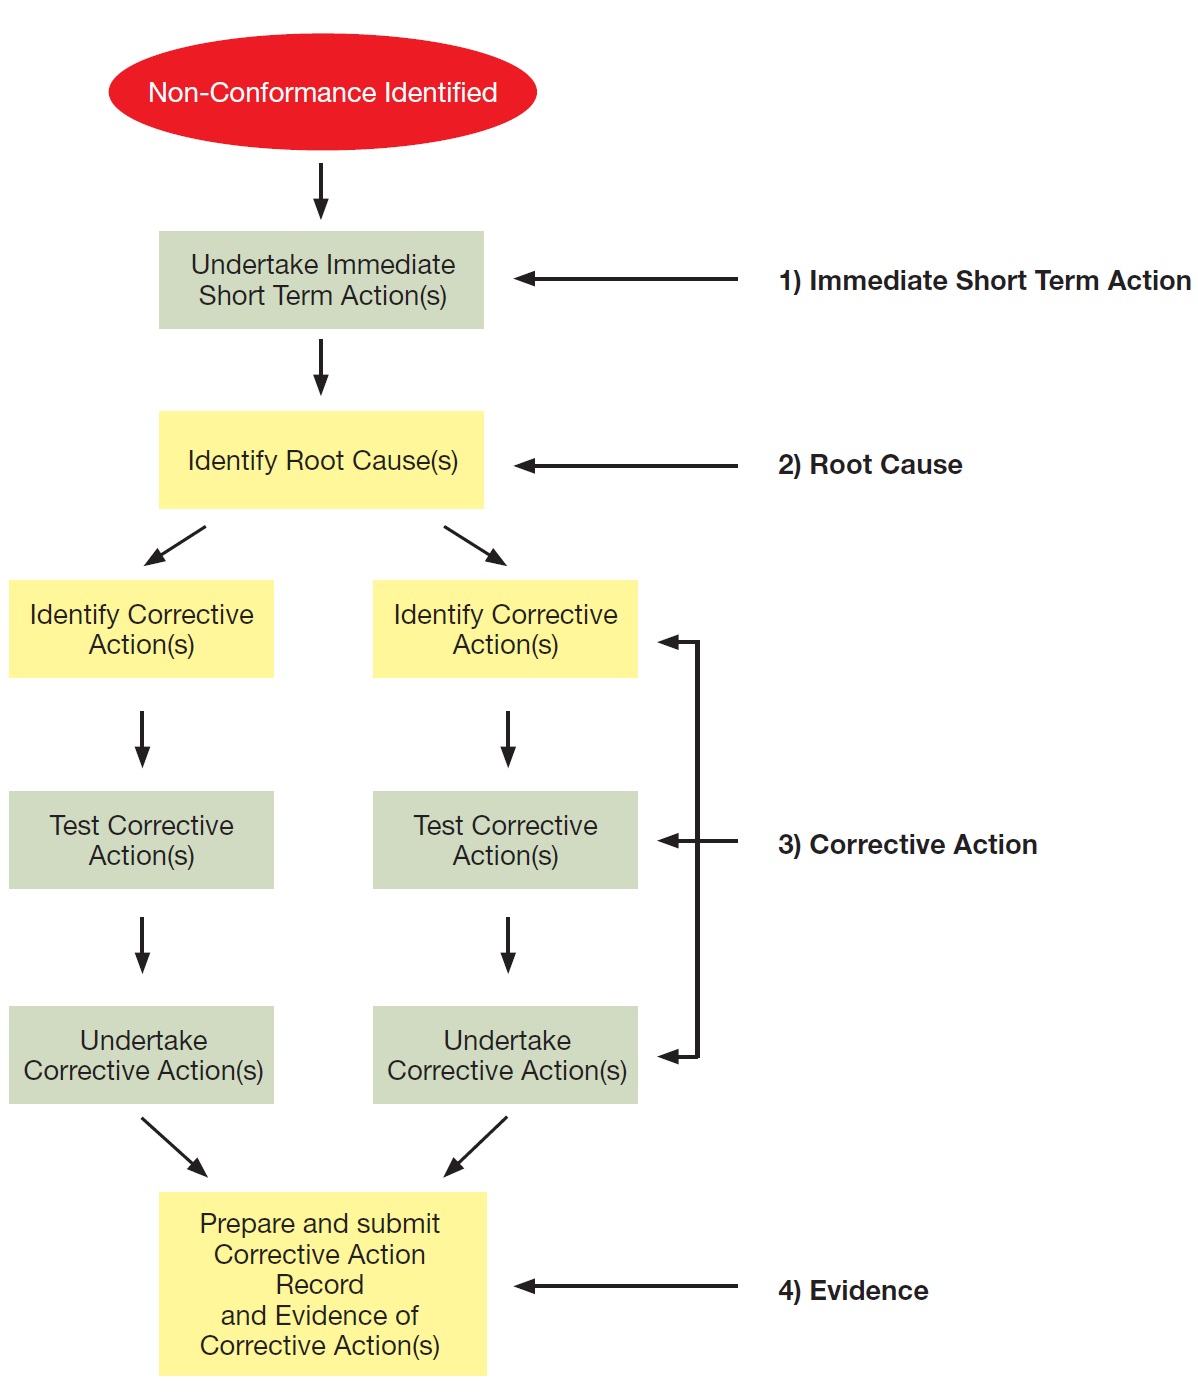 This flow chart illustrates a simplified workflow for preparing a corrective action record. Once a non-conformance is identified, immediate short term actions should be undertaken. Following these actions, the root cause(s) of the problem and corrective action(s) should be identified. Each corrective action should be tested to verify that the root cause is effectively addressed and that new non-conformances have not been introduced. Once the corrective actions have been tested and undertaken, a corrective action record should be prepared. This record should include details about each of the steps taken in the corrective action process, and will provide evidence that non-conformance has been addressed and corrected.